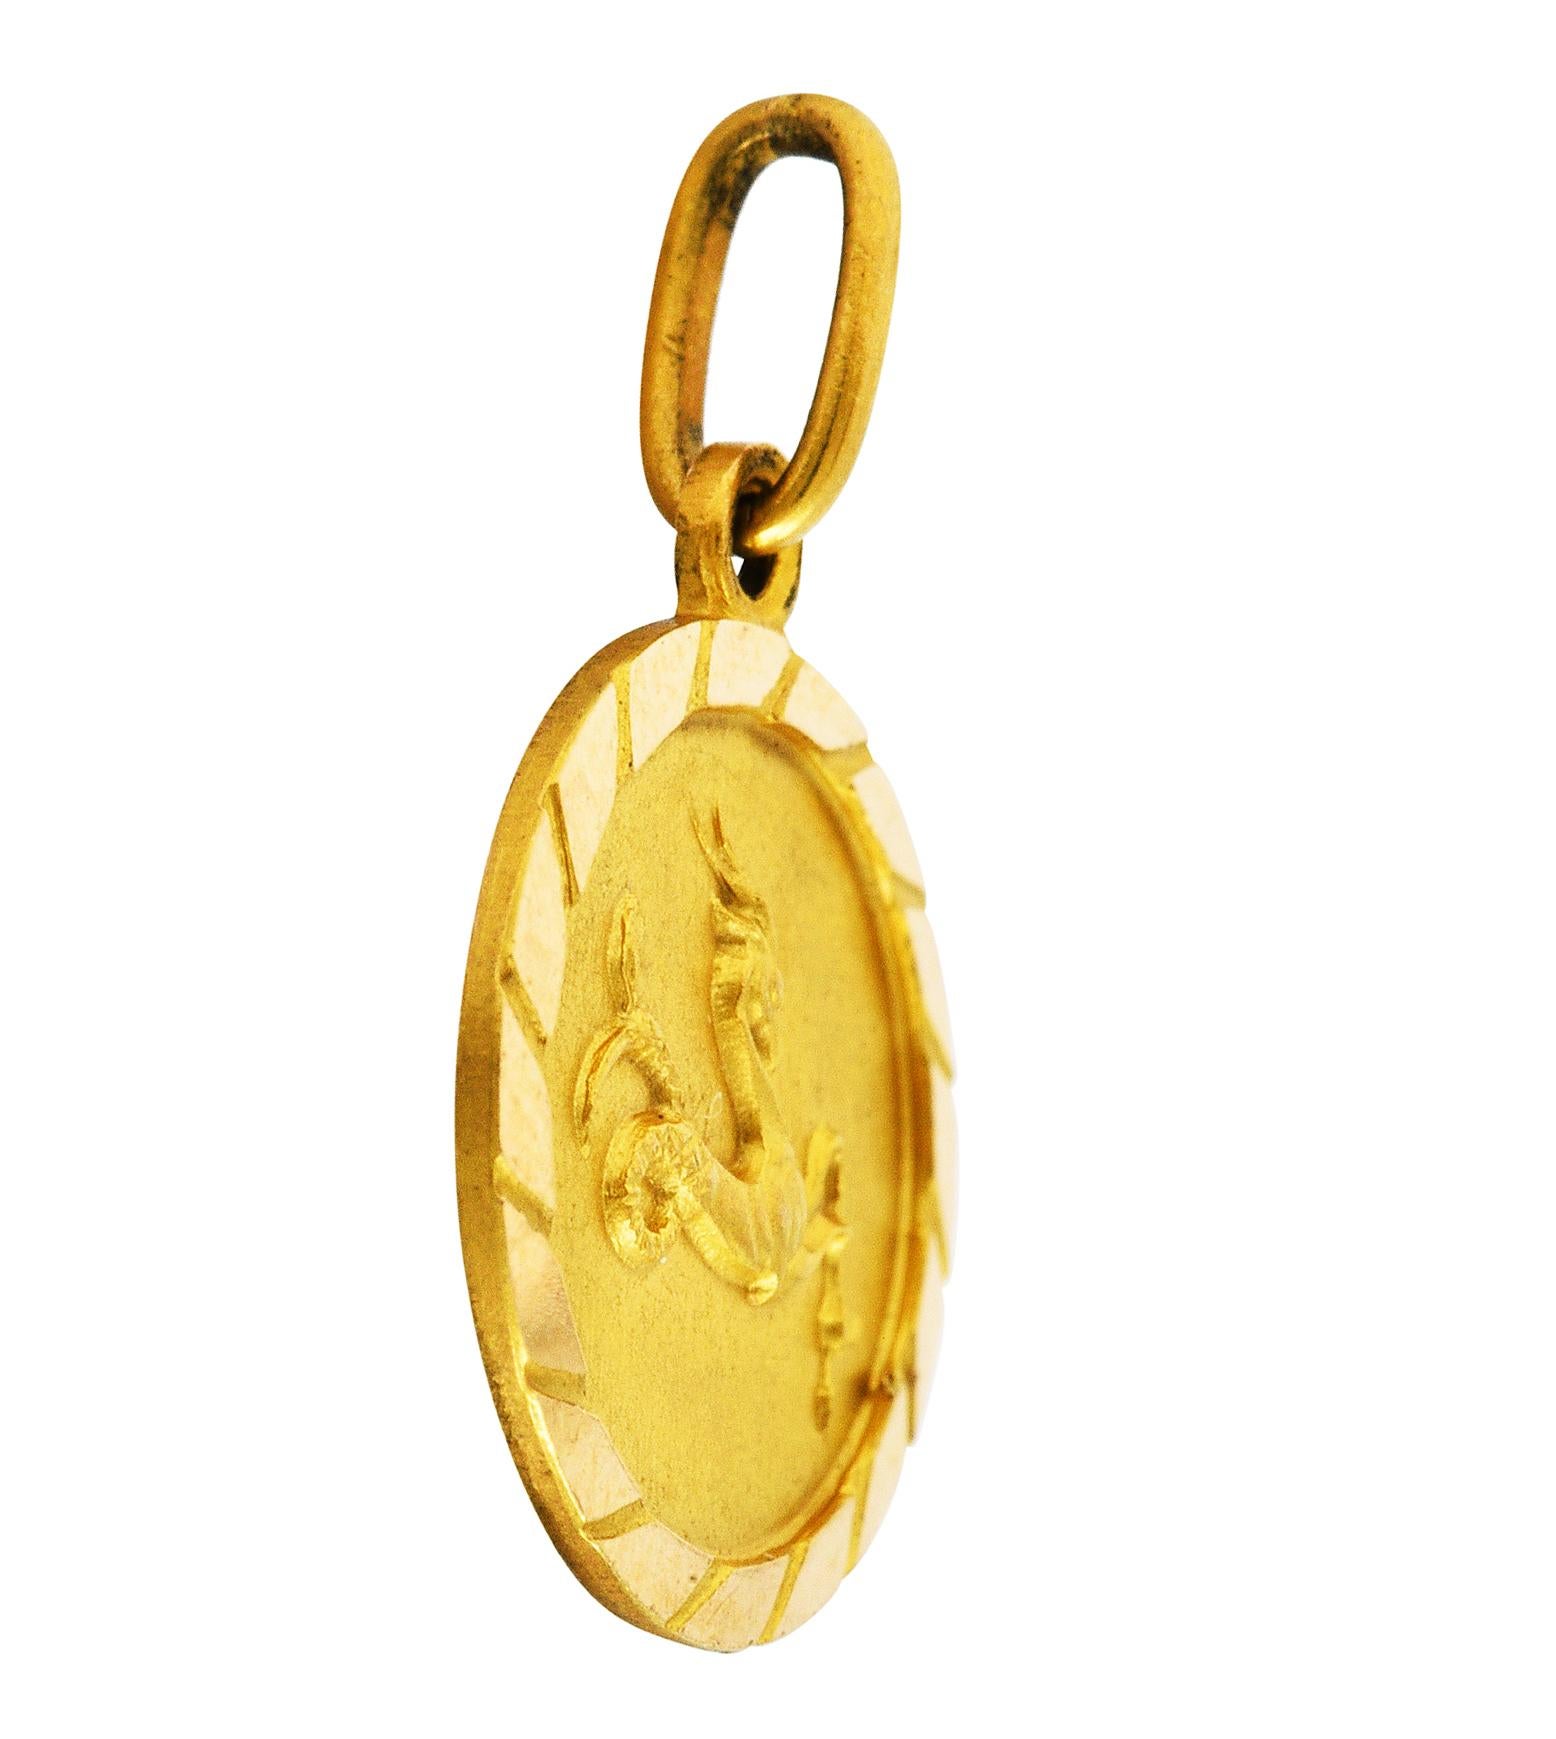 Circular charm has a matte finish and a raised rendering of Capricorn

Zodiac figure depicted as a sea goat with horned head and fish tail

Faceted high polished surround

Stamped 750 for 18 karat gold

Circa: 1970's

Measures: 1/2 x 3/4 inch